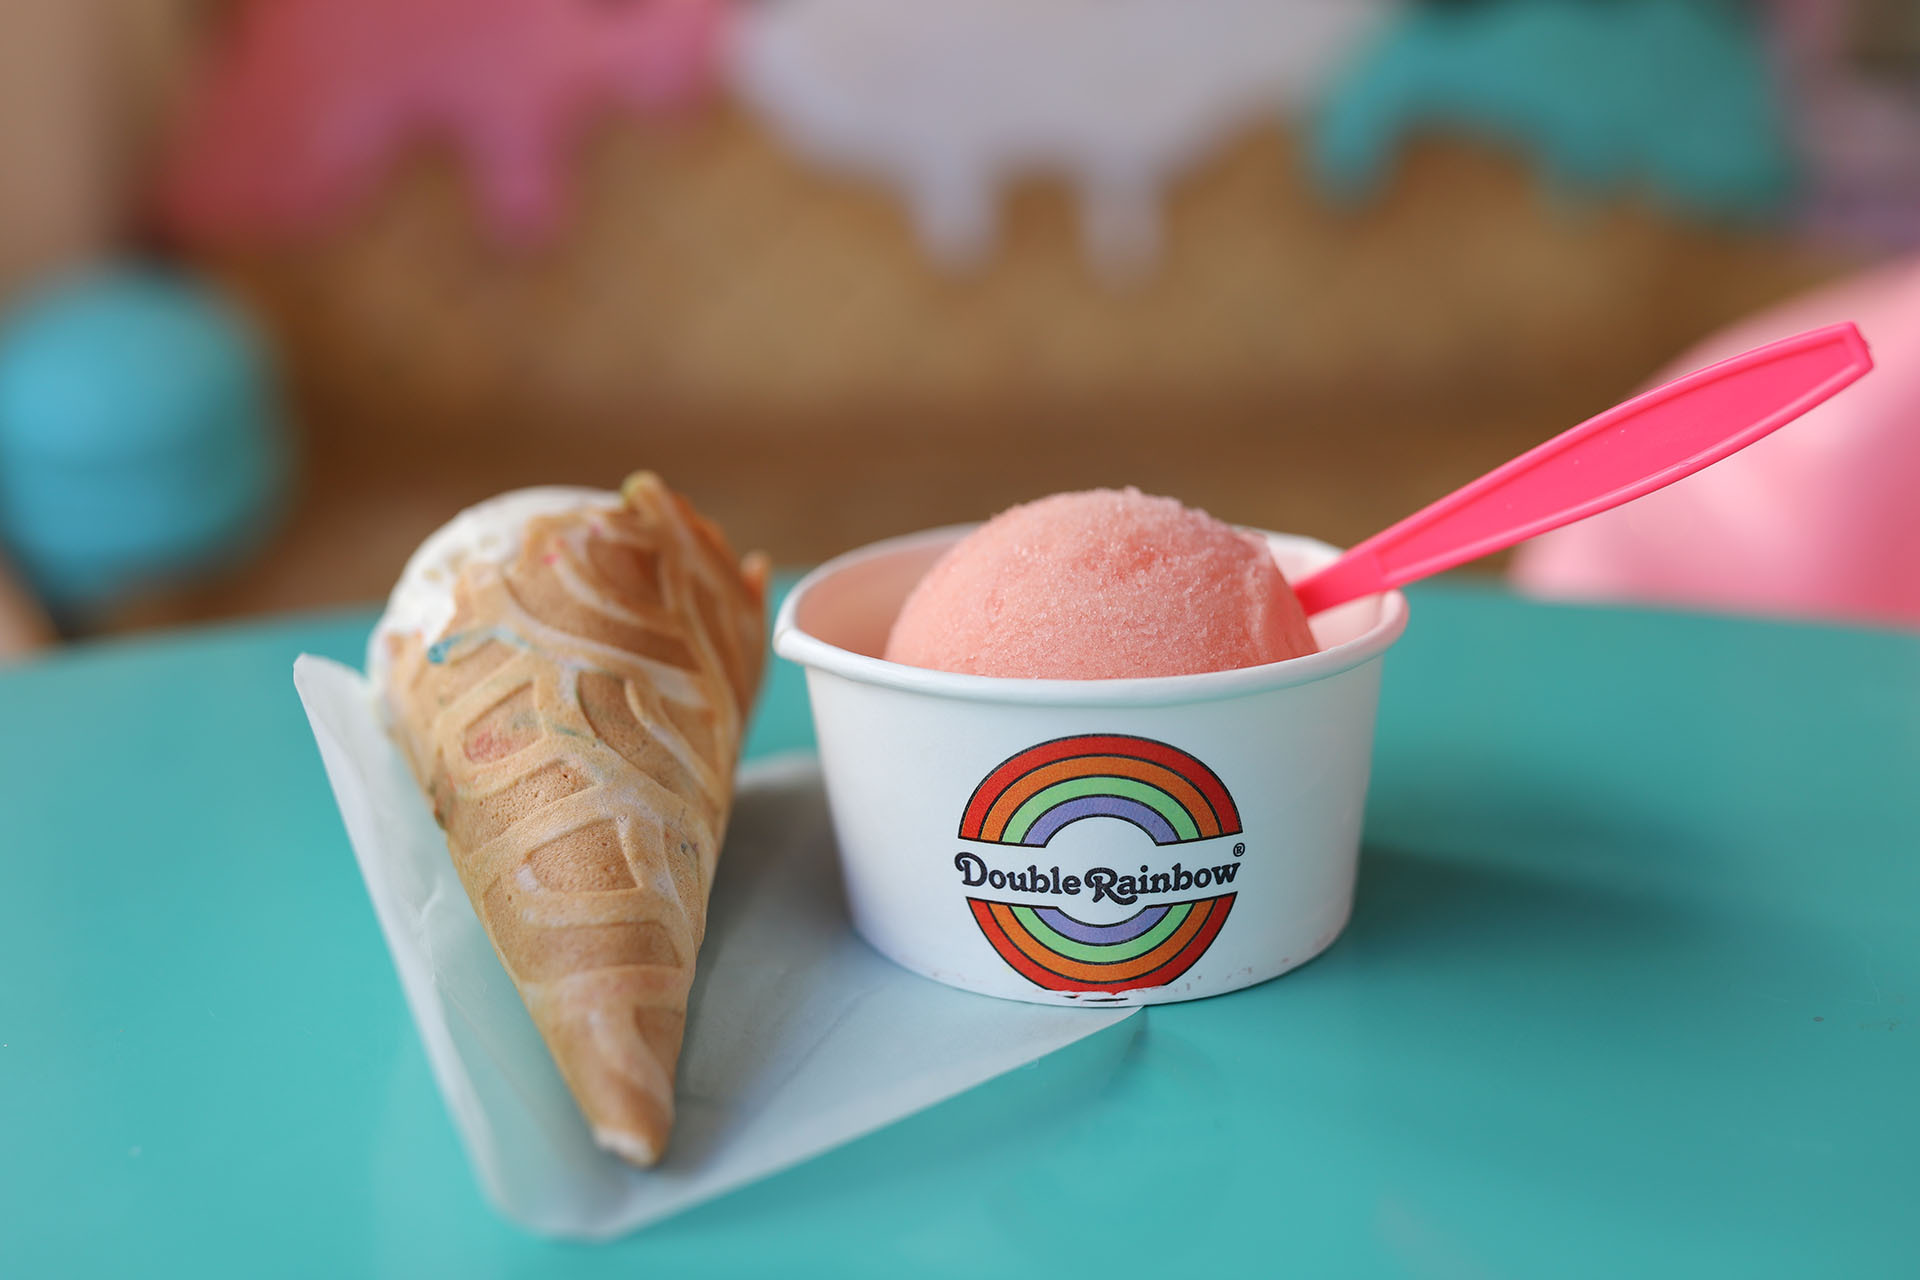 a scoop of guava Italian ice and an ice cream cone inside an ice cream parlor